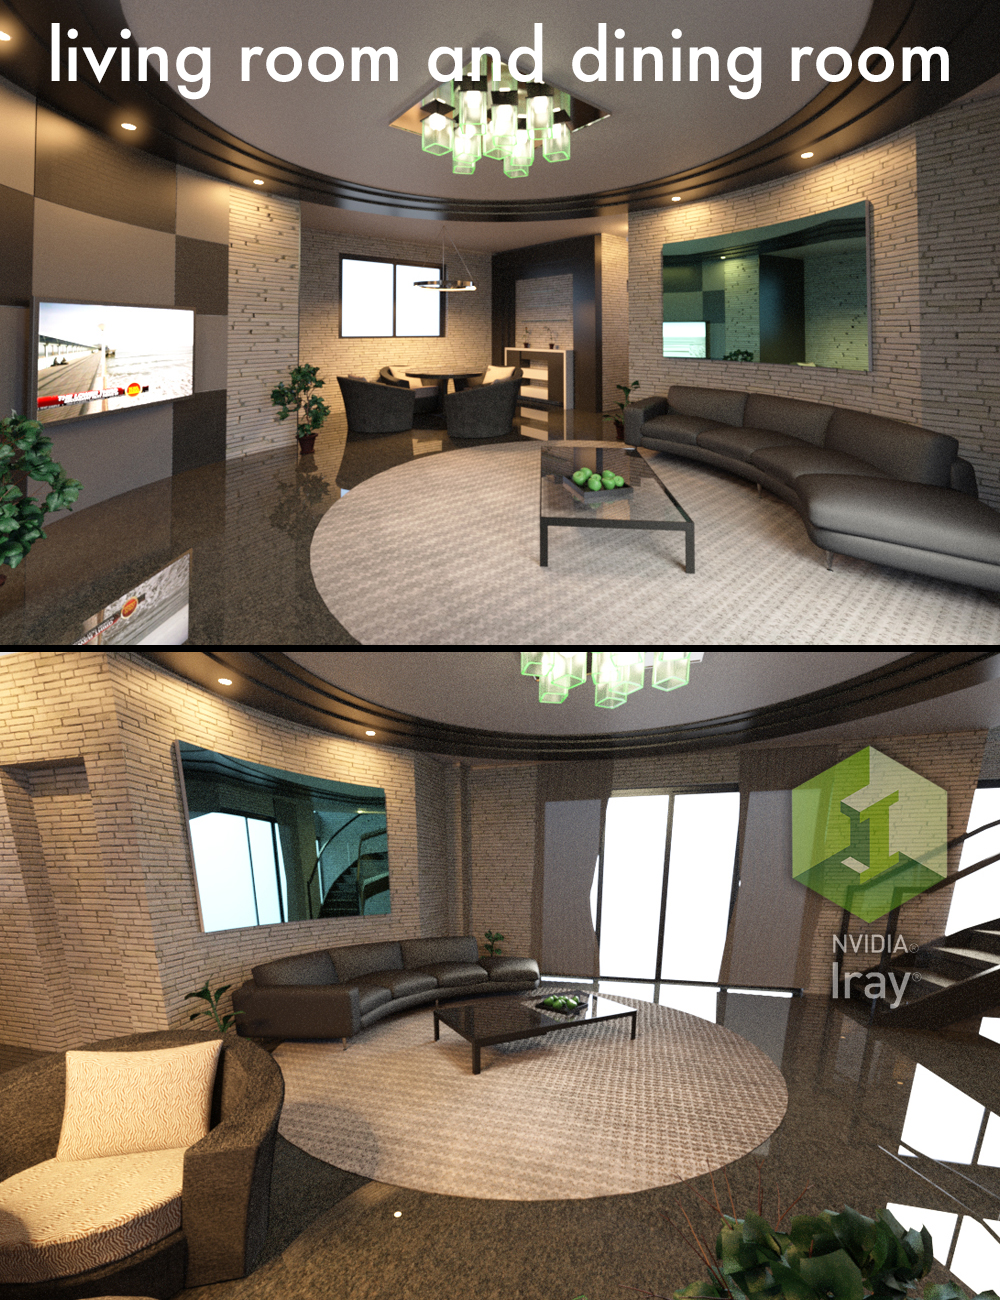 Tesla Living Room and Dining Room by: Tesla3dCorp, 3D Models by Daz 3D